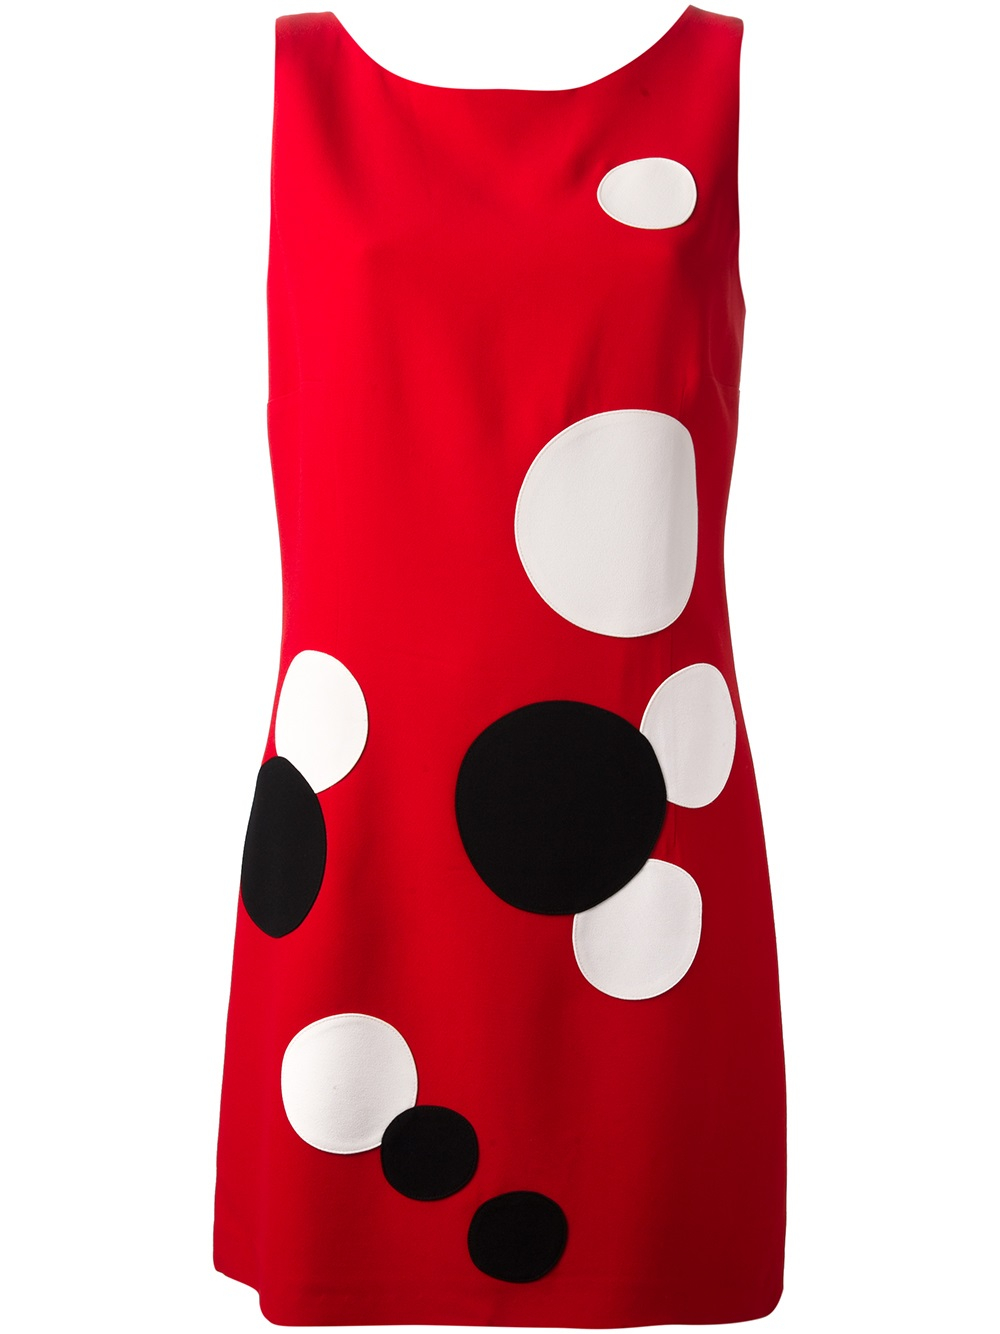 Boutique Moschino Applique Polka Dot Dress in Red | Lyst